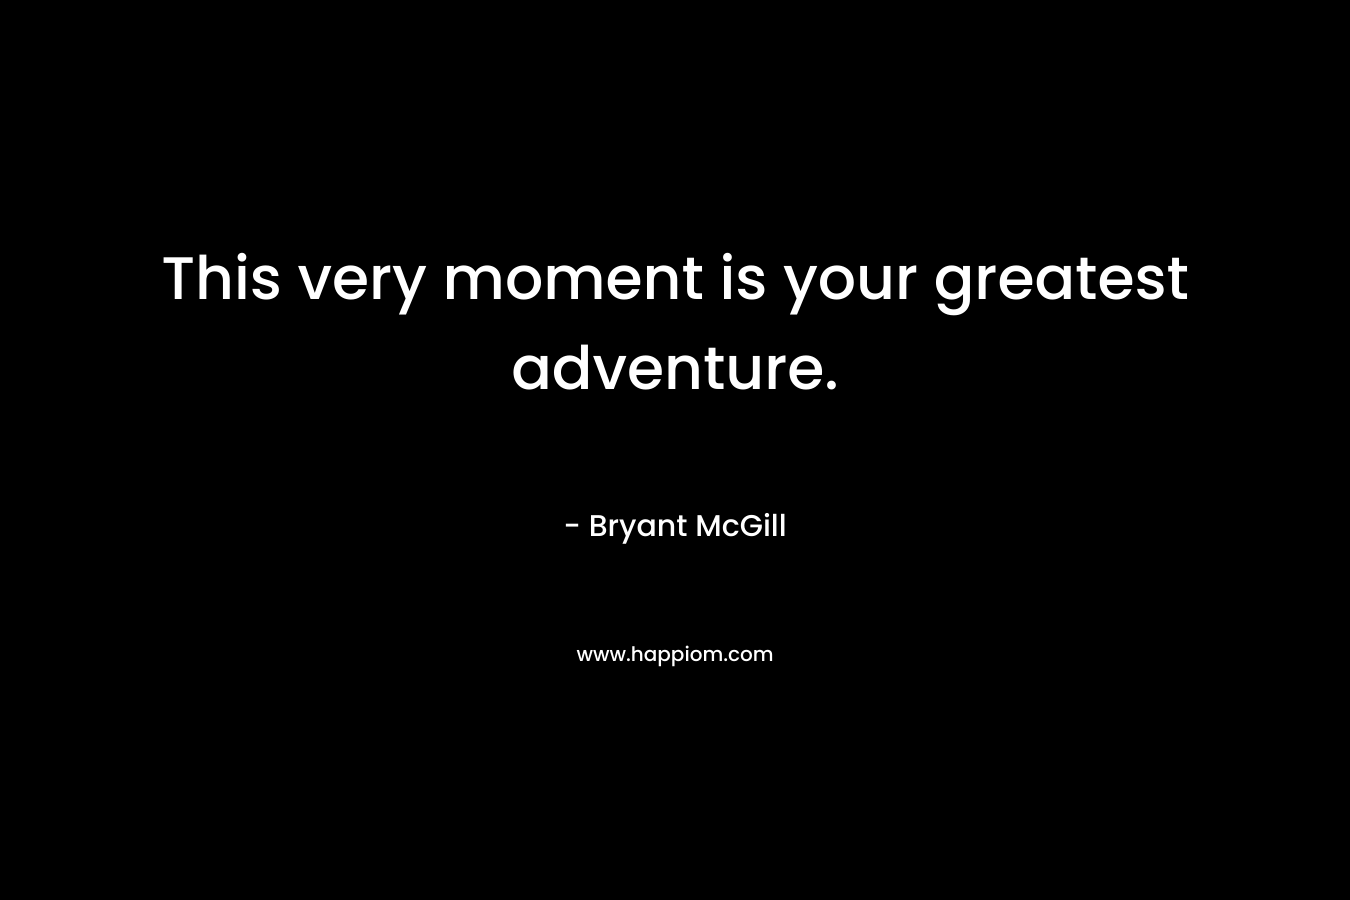 This very moment is your greatest adventure.